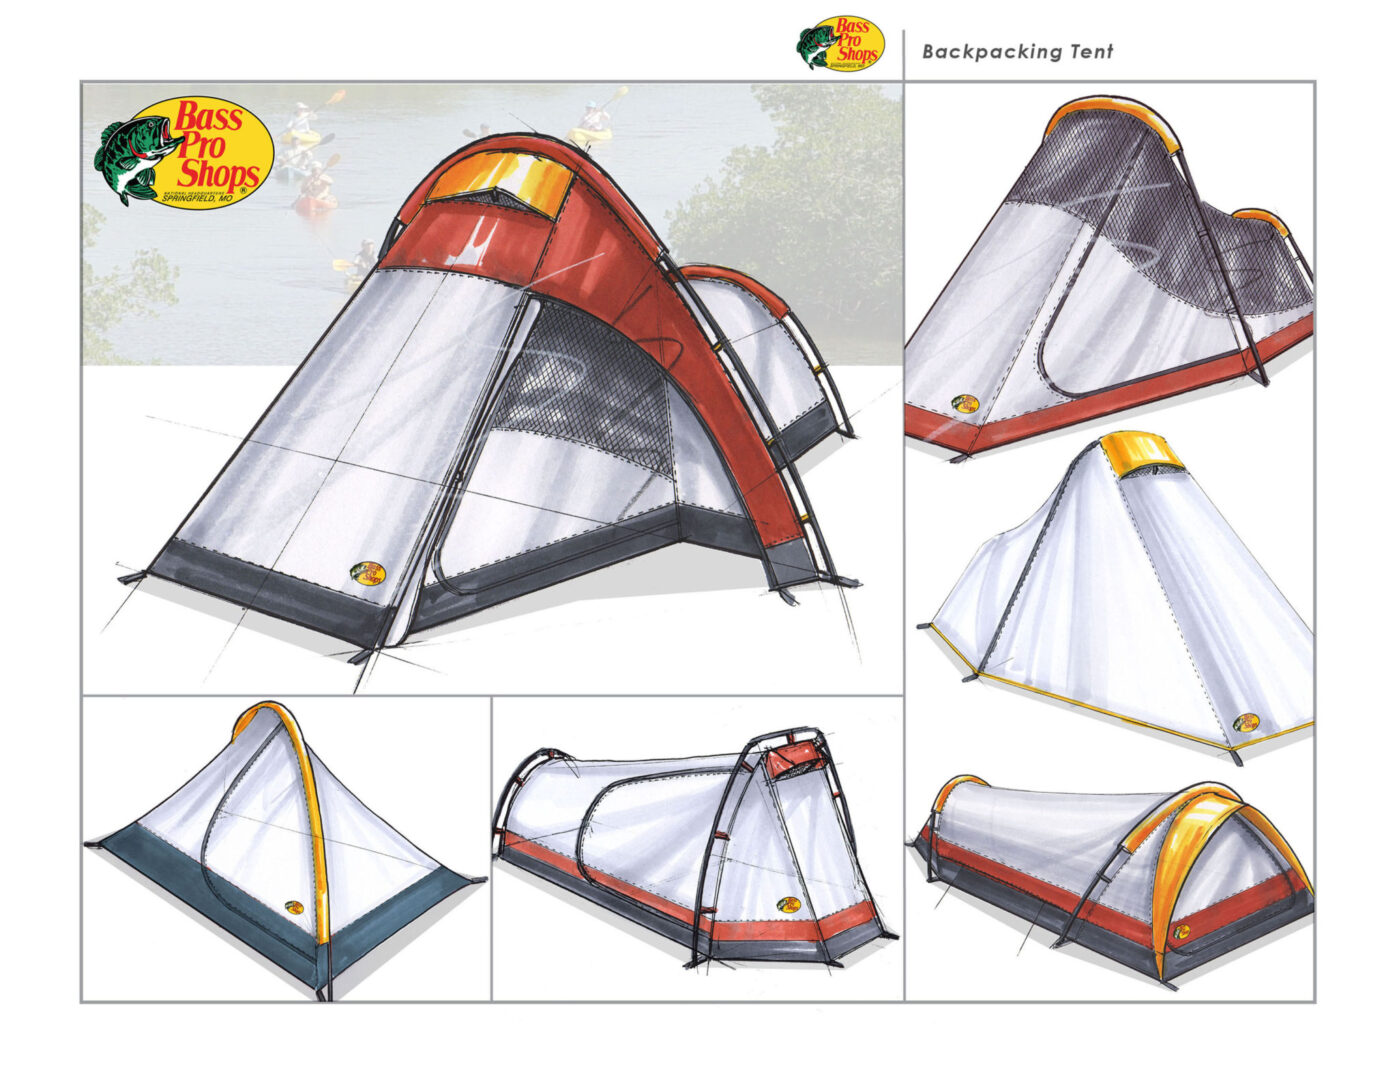 Bass Pro Shops Backpacking Tent